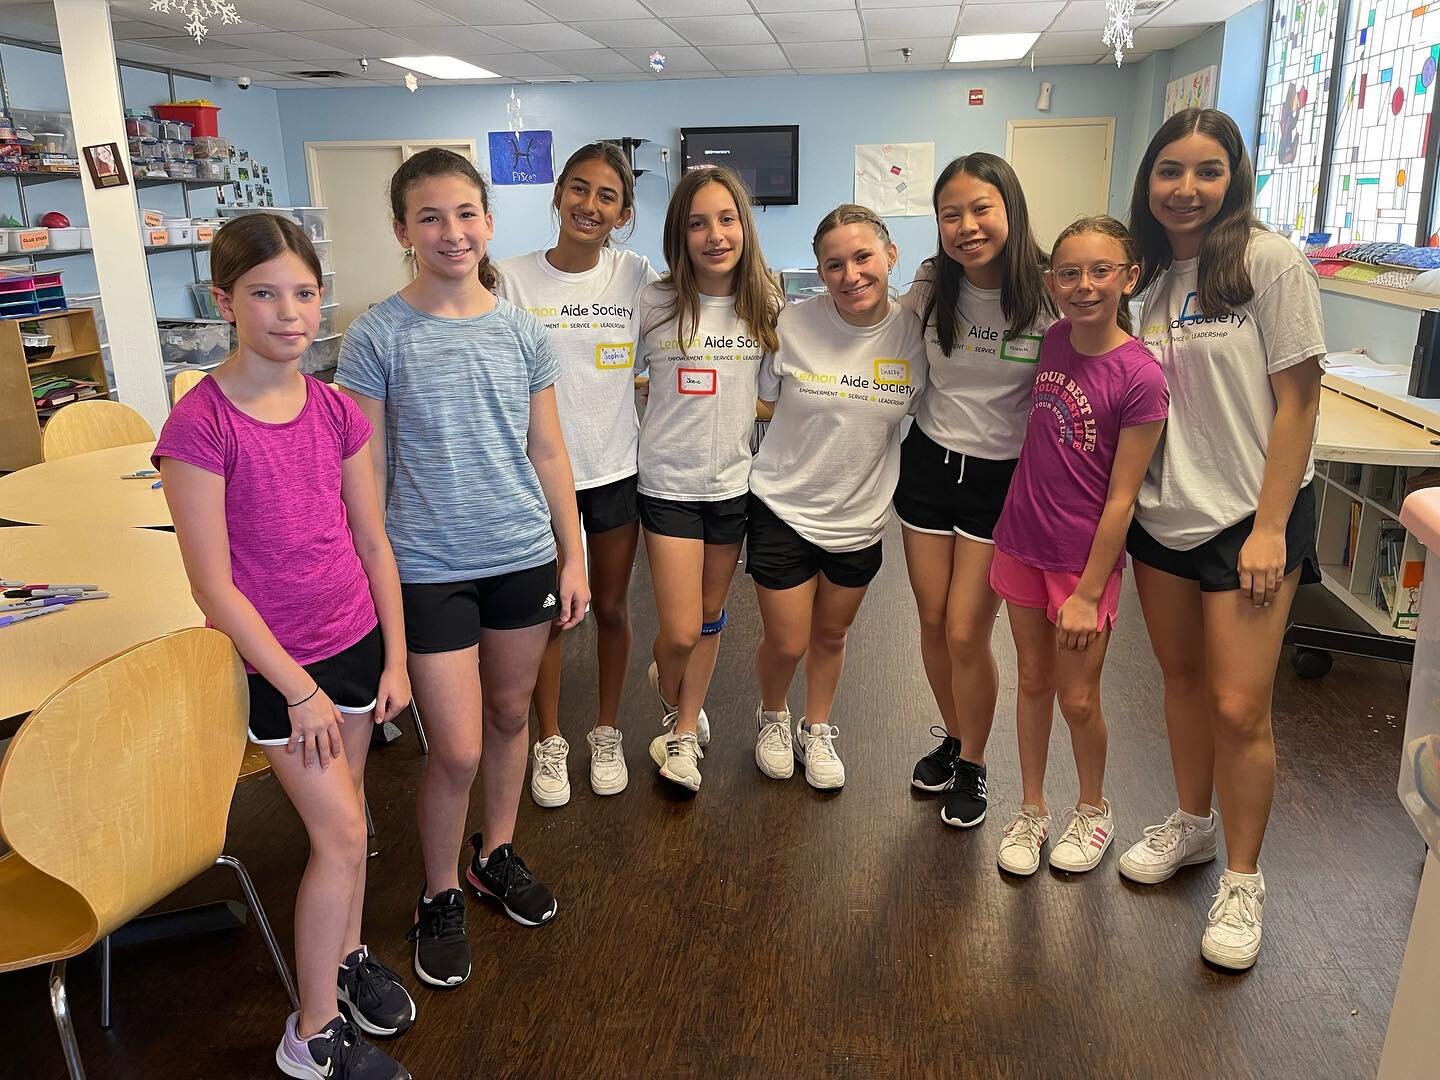 Camp with the children at @familygateway - we are excited to share with them in making a difference every day! Planned by a Teen Mentor- that&rsquo;s Lemon Aide Society, empowering our girls to lead!